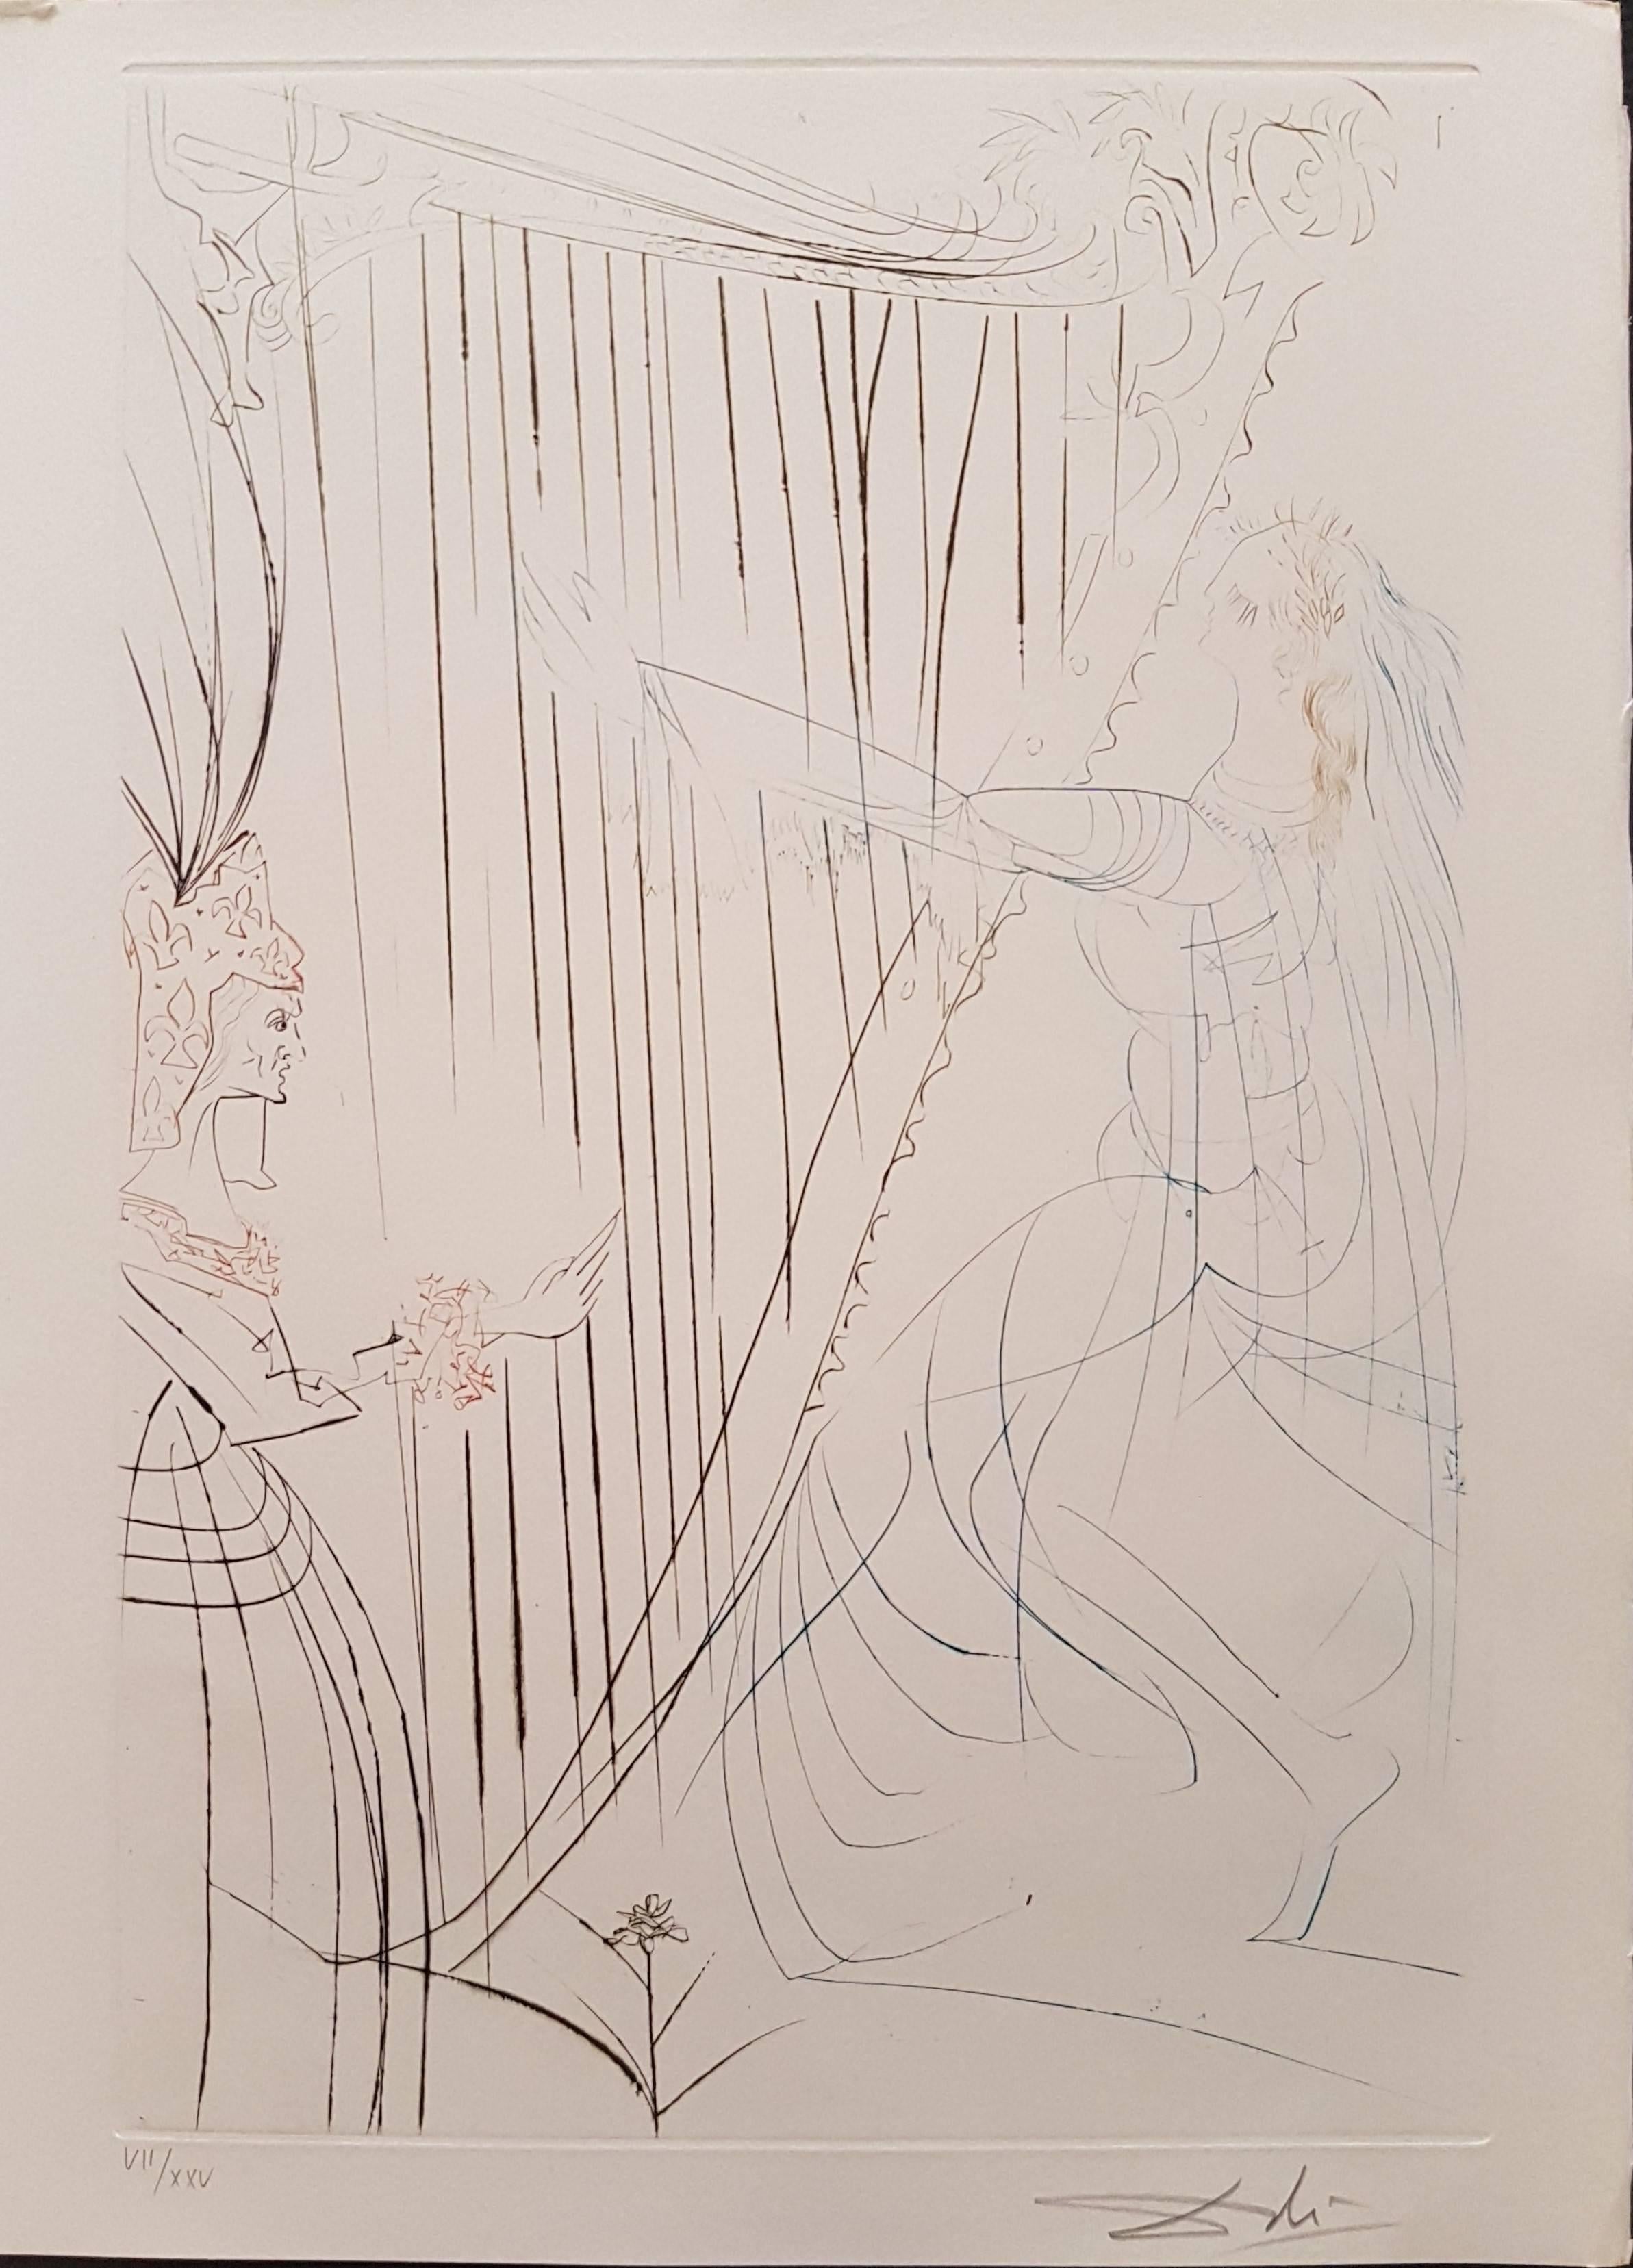 Salvador Dalí Abstract Print - Plate from "Tristan and Isolde": Queen Isolde and Her Daughter